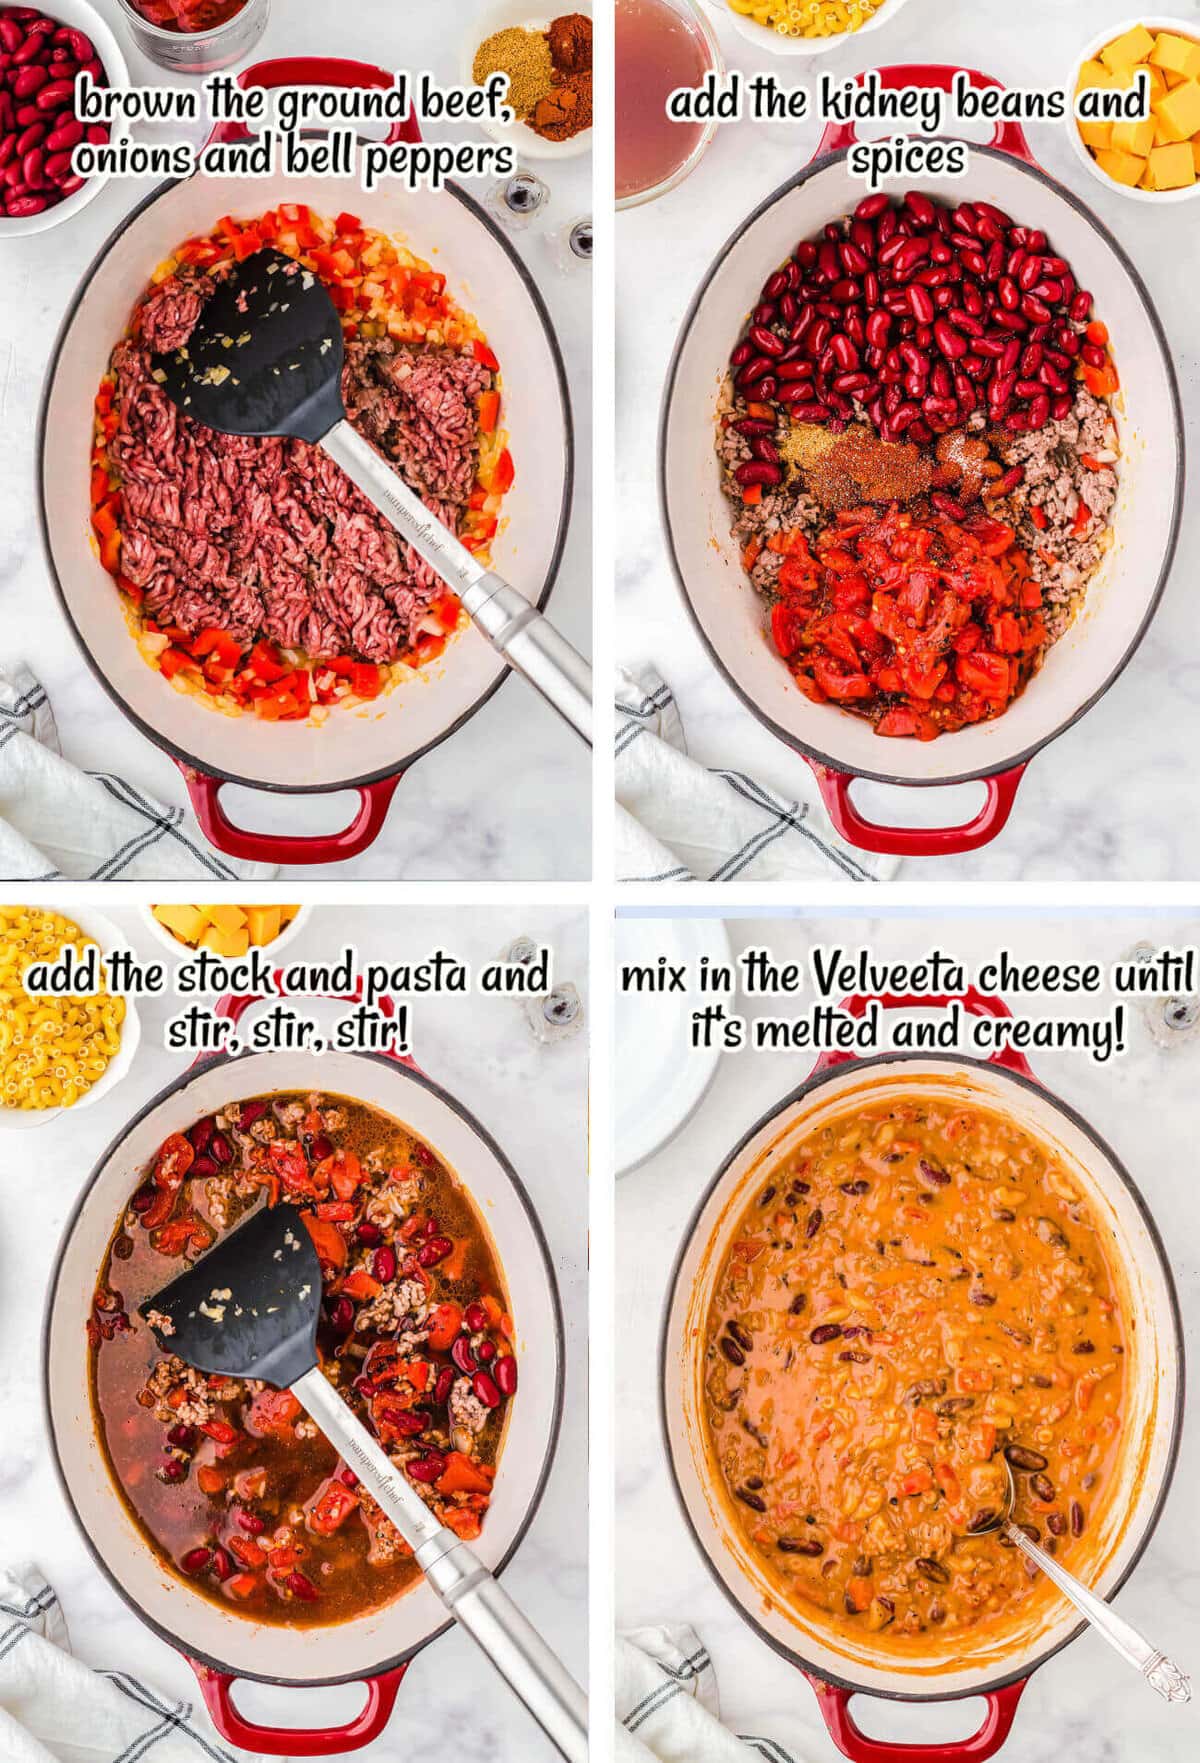 Step by step photos showing how to make Chili Mac n Cheese. With print overlay.